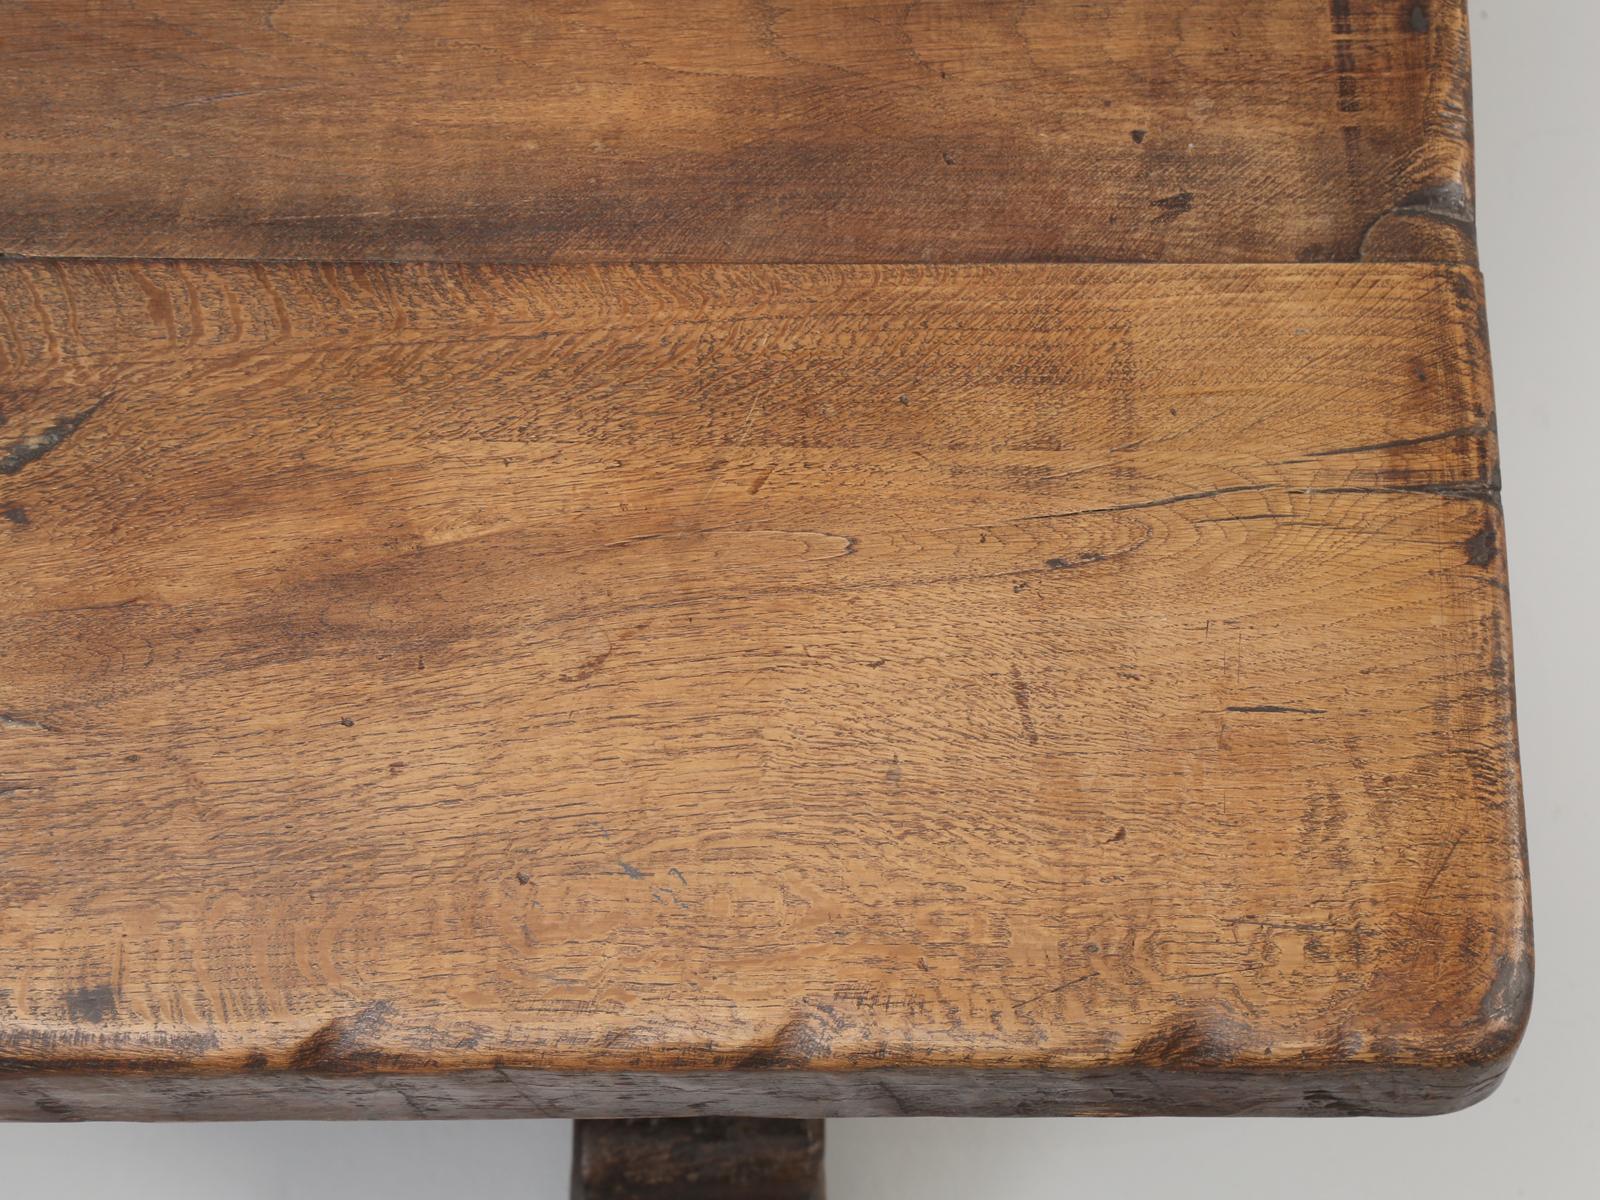 Early 19th Century Original Antique French Farm or Trestle Table, circa 200 Years Old, Unrestored